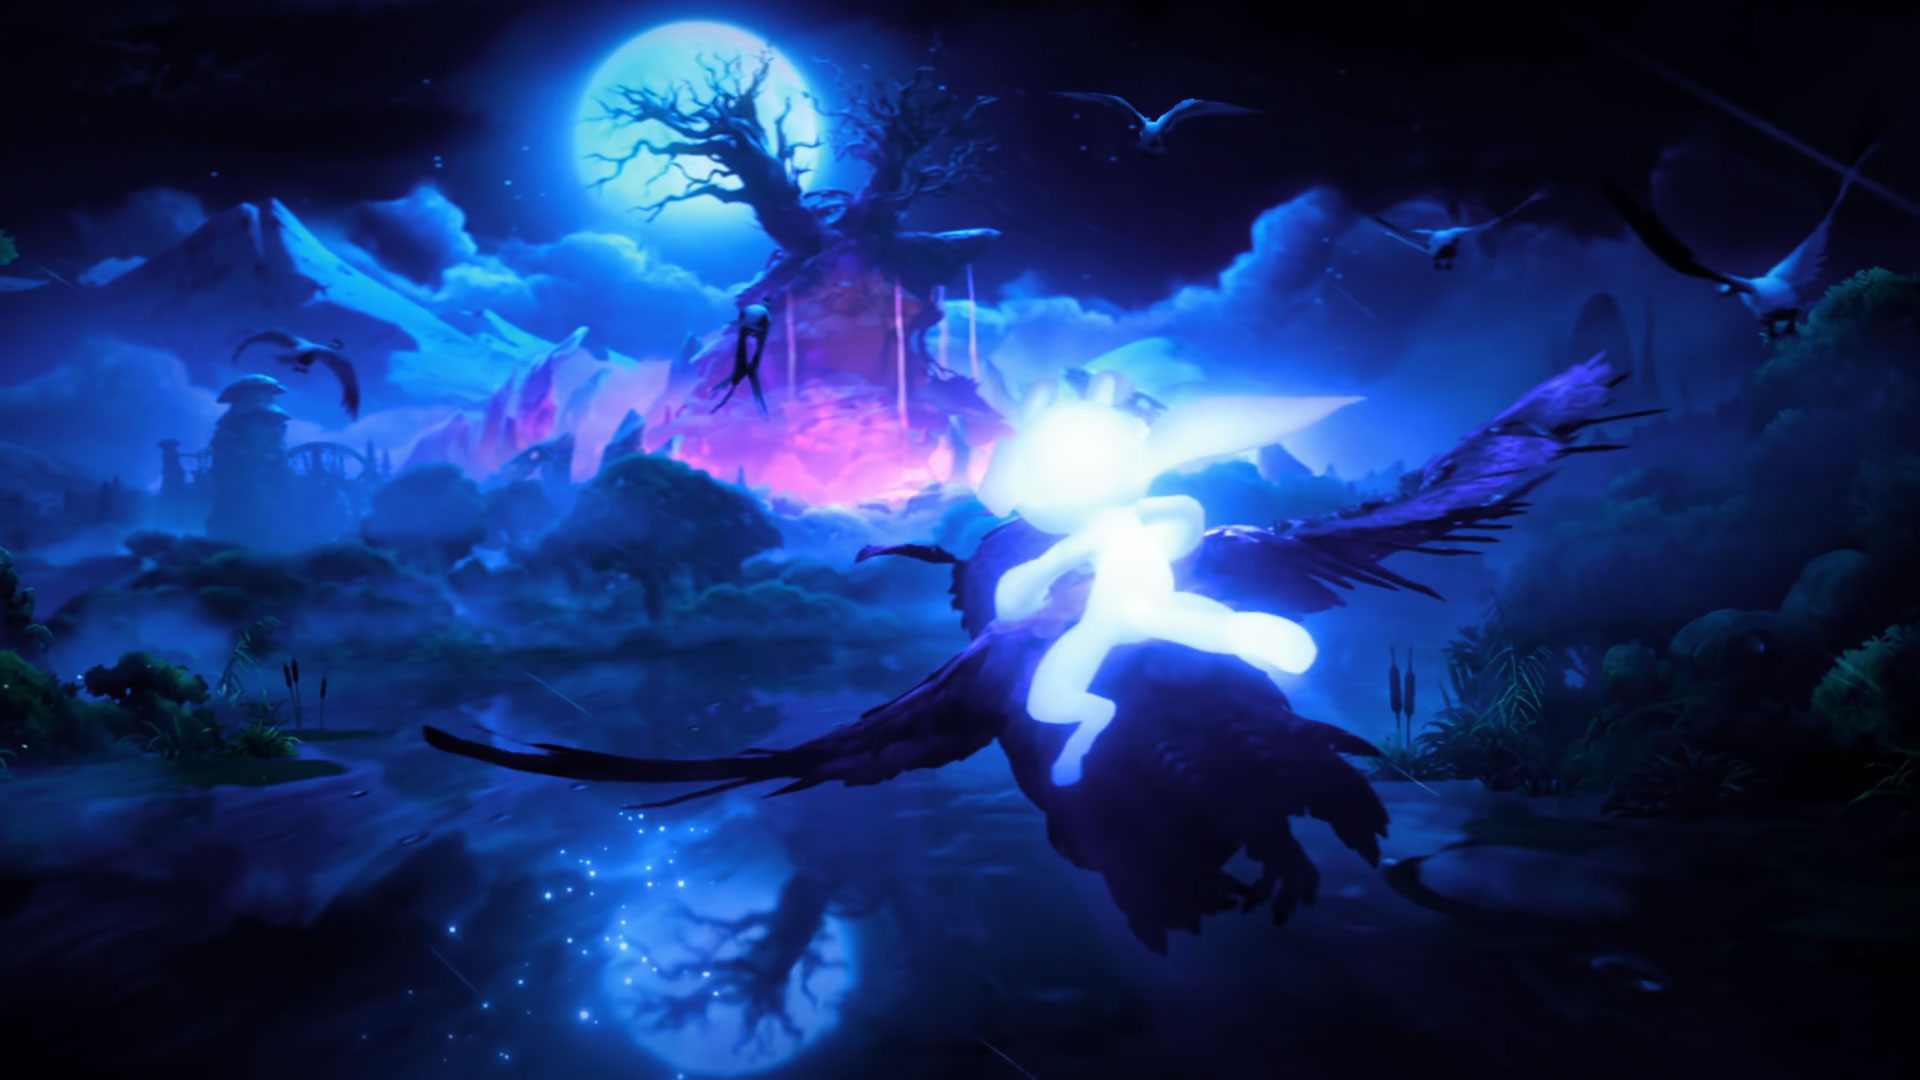 27+] Ori And The Will Of The Wisps Wallpapers - WallpaperSafari